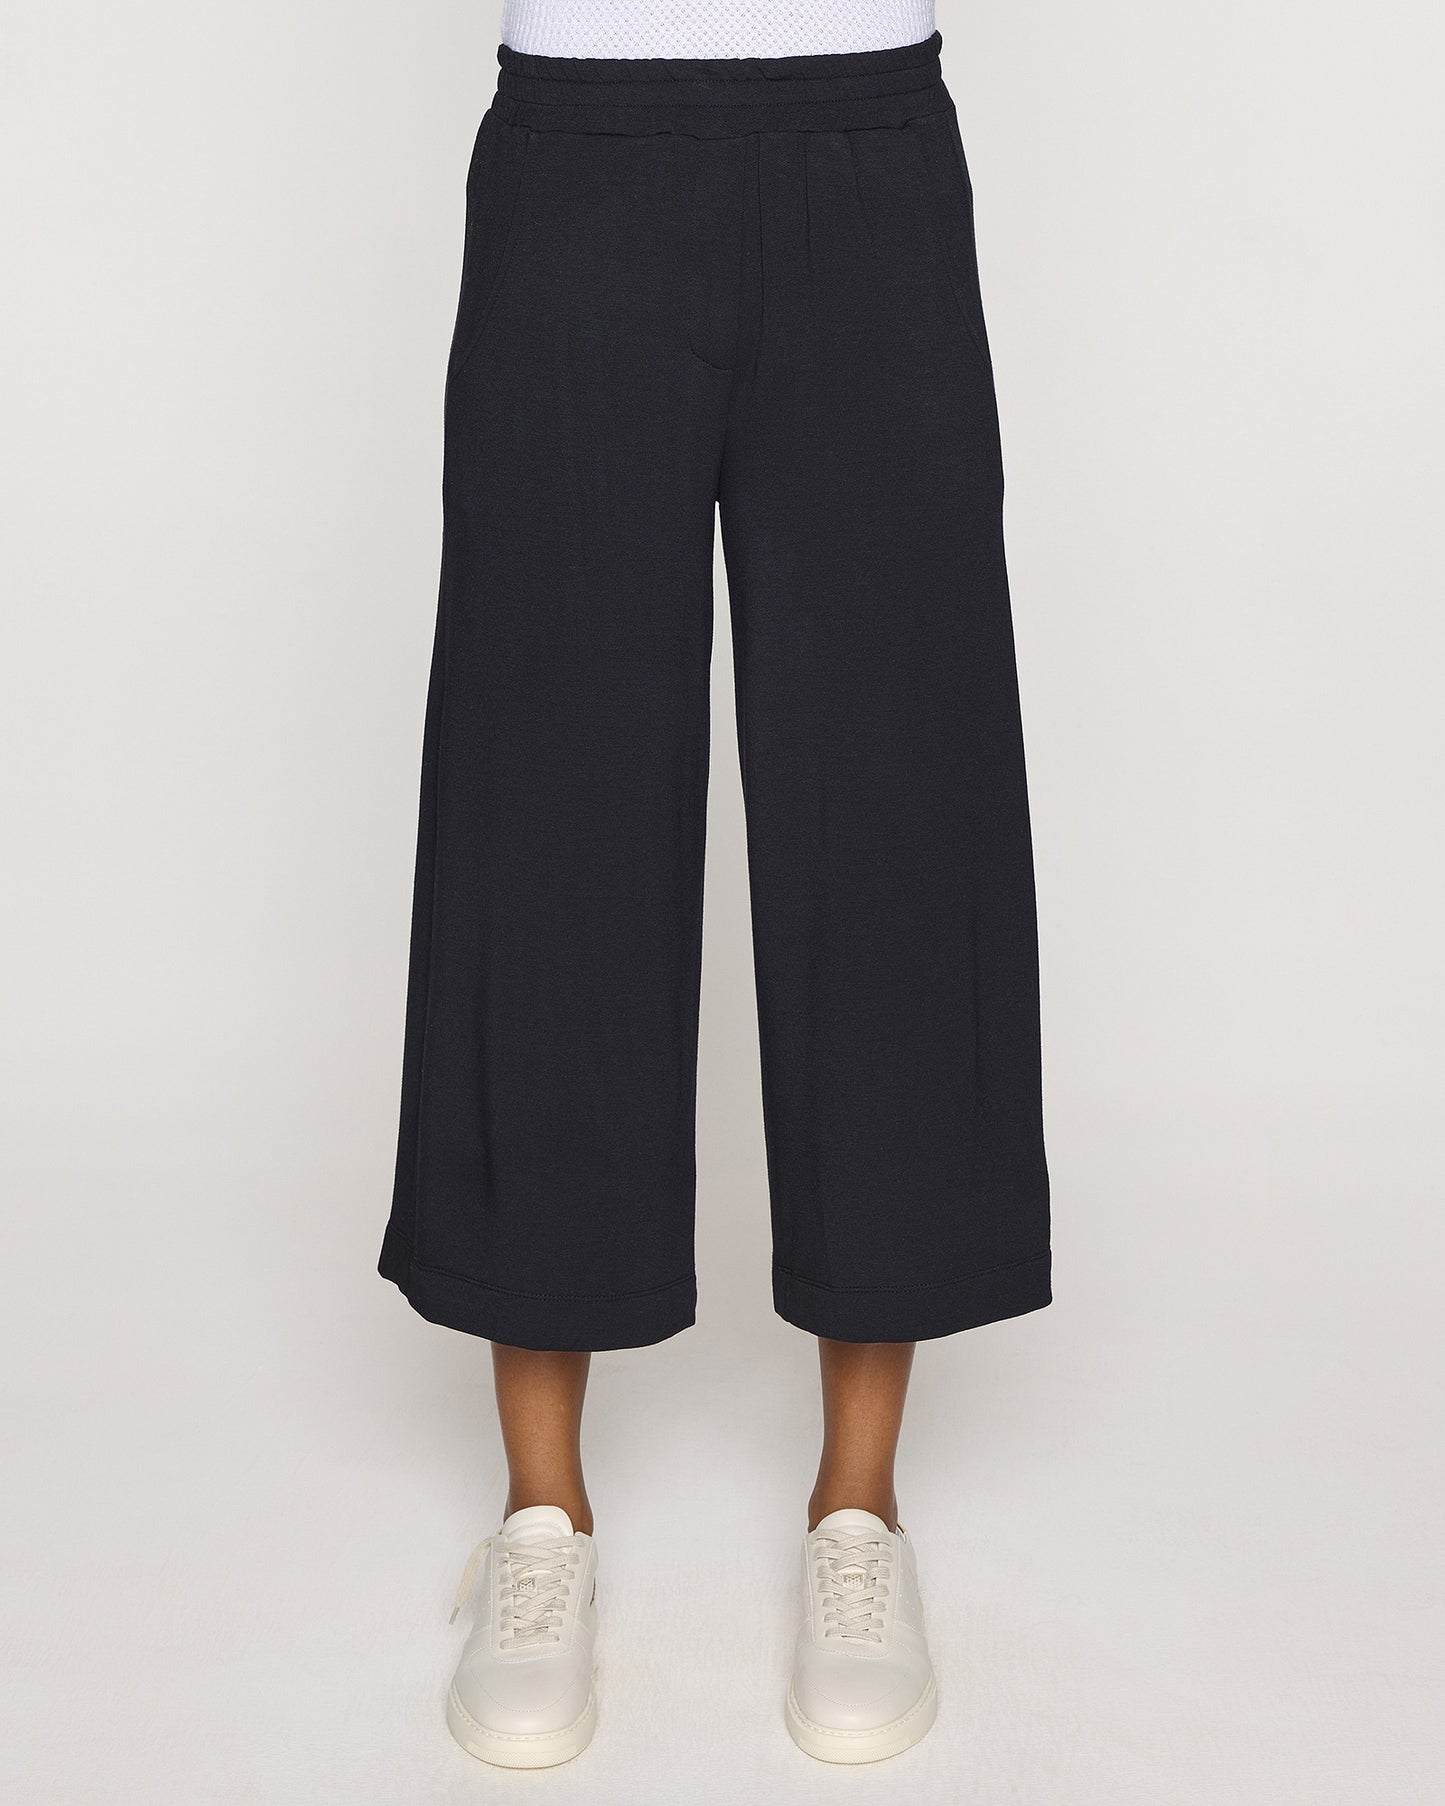 Black | The Culottes Front